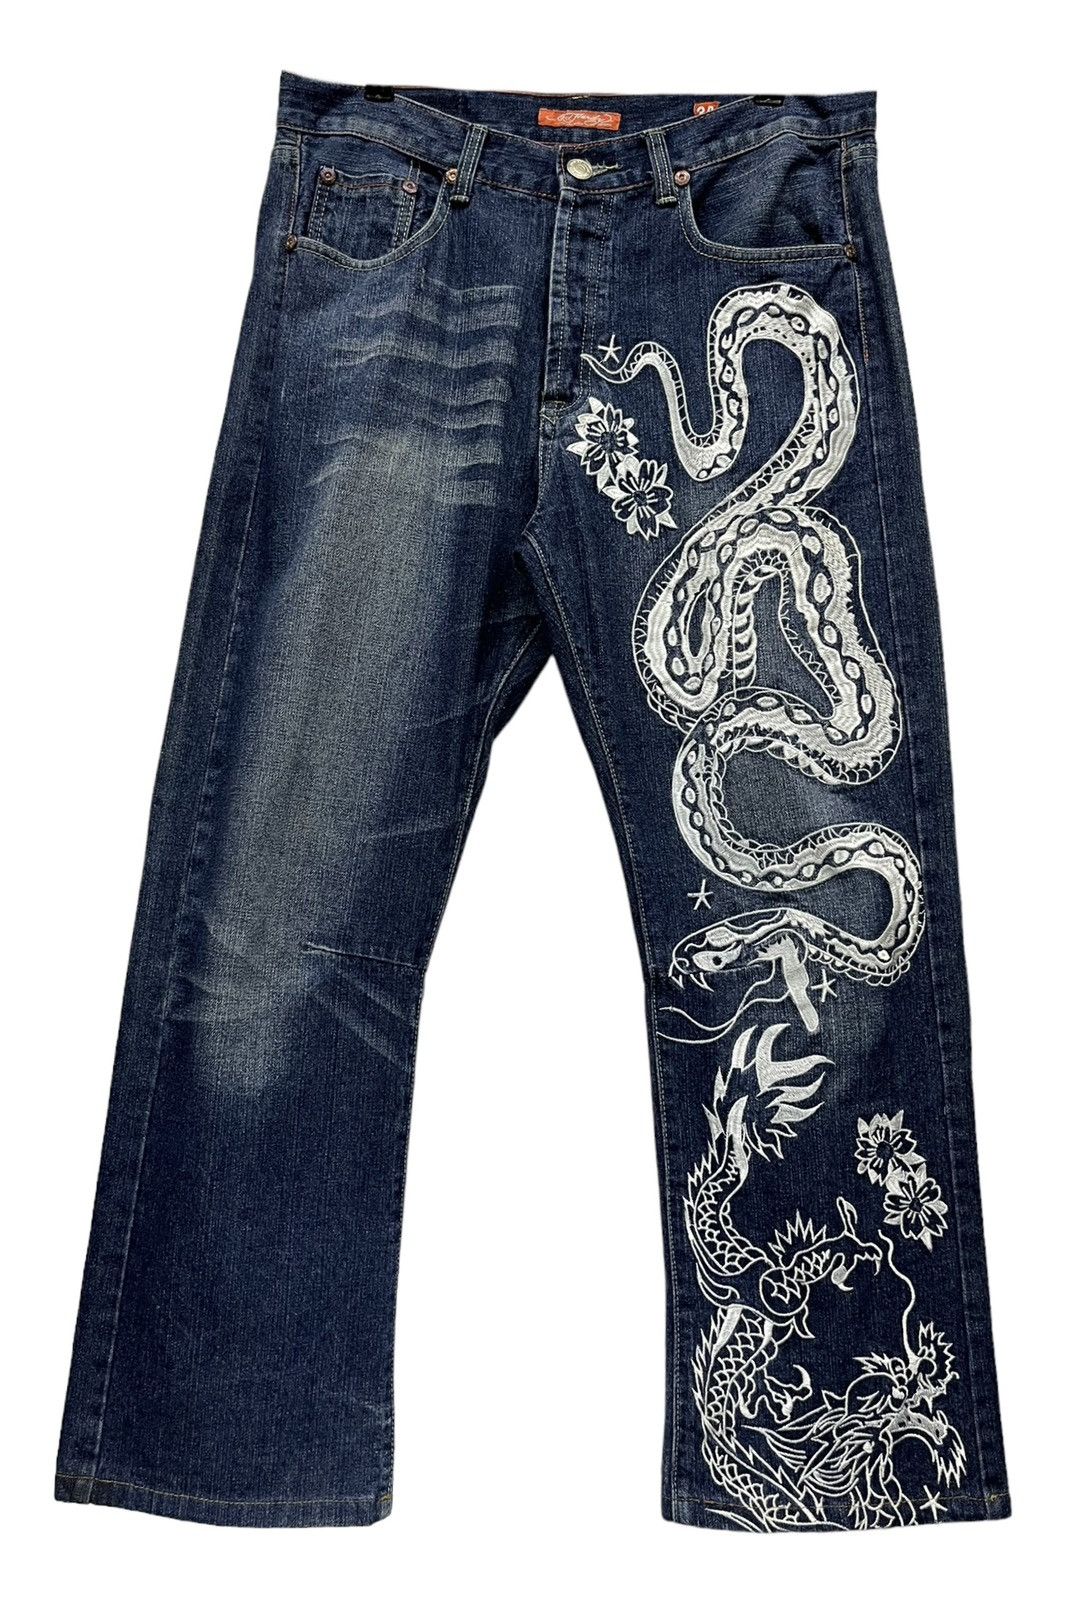 Ed Hardy BINDING NOW🔥ED HARDY Snake & Dragon Embroidered Tattoo Wear Size US 33 - 2 Preview